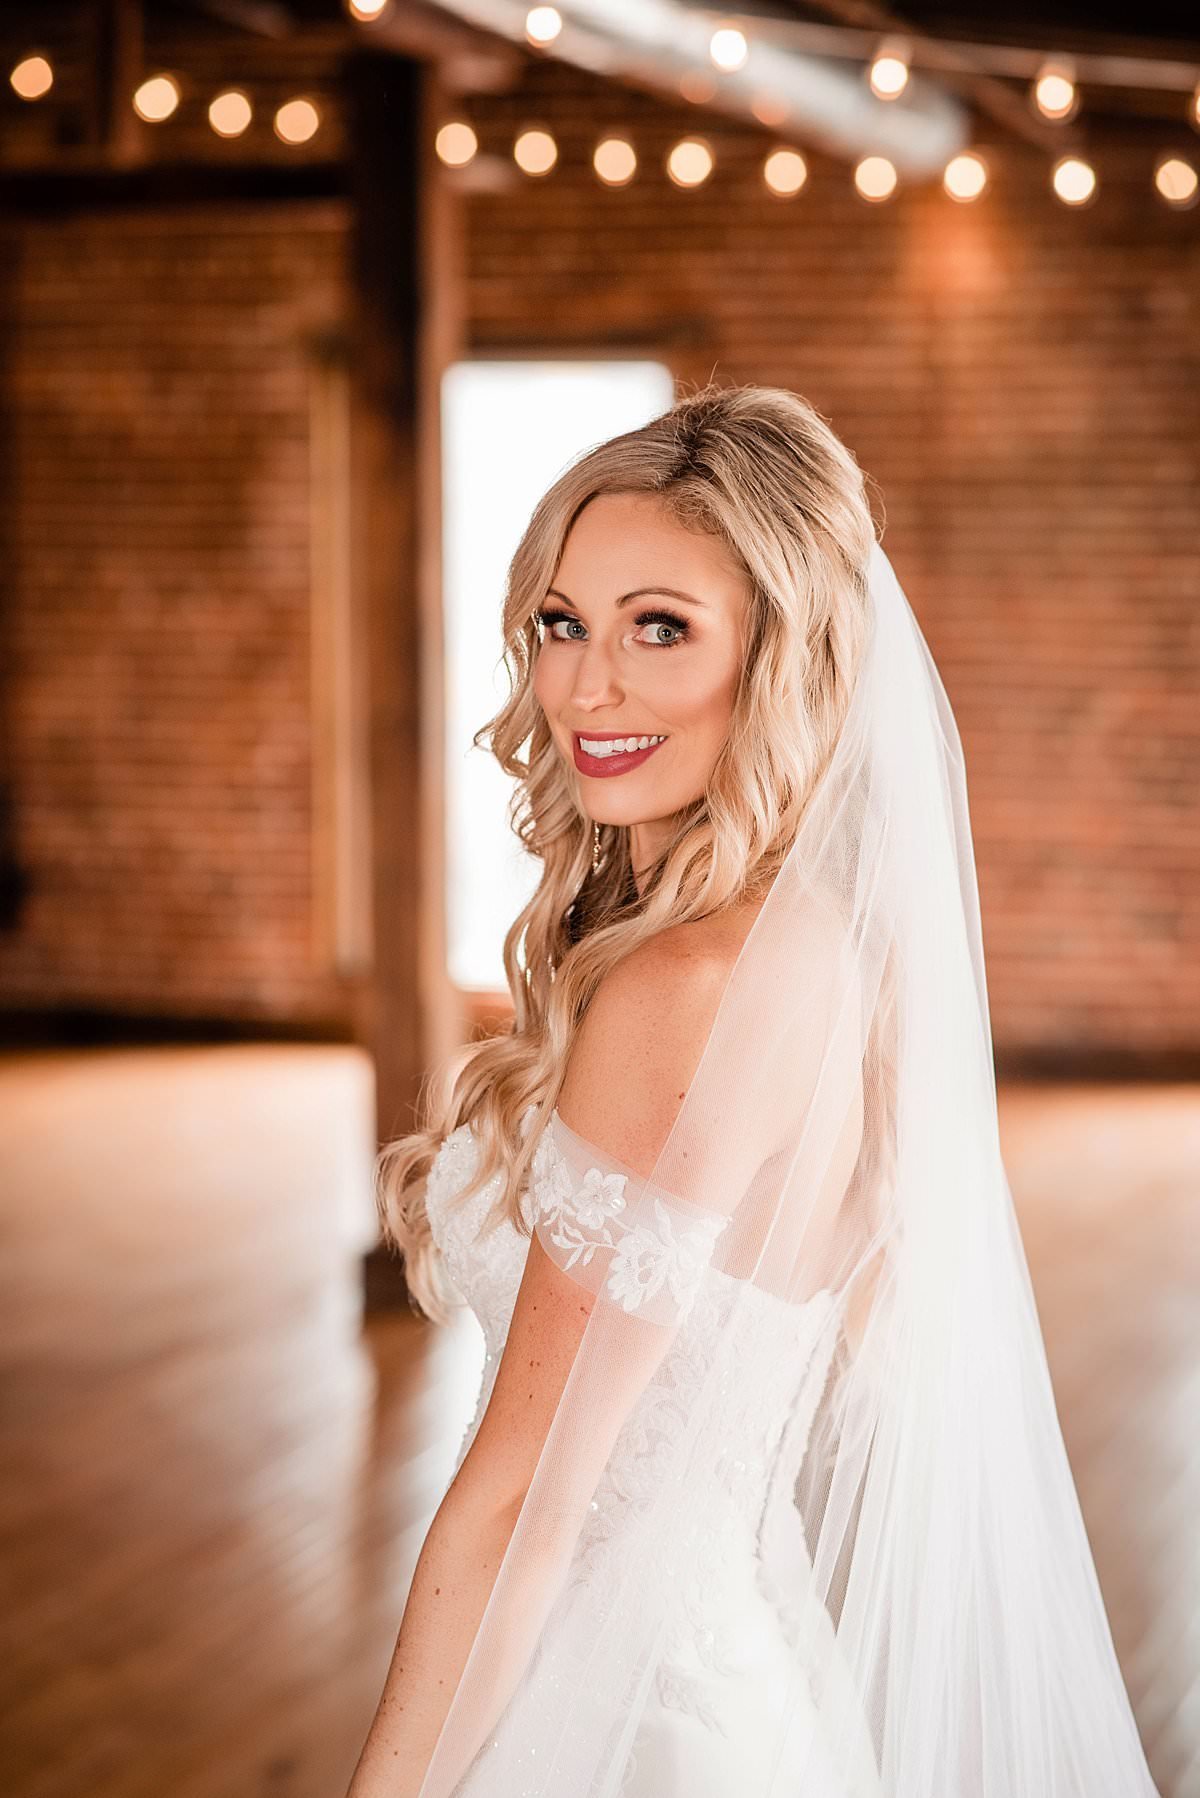 Bride looking over her shoulder at the camera, cathedral veil flowing and bistro lights above